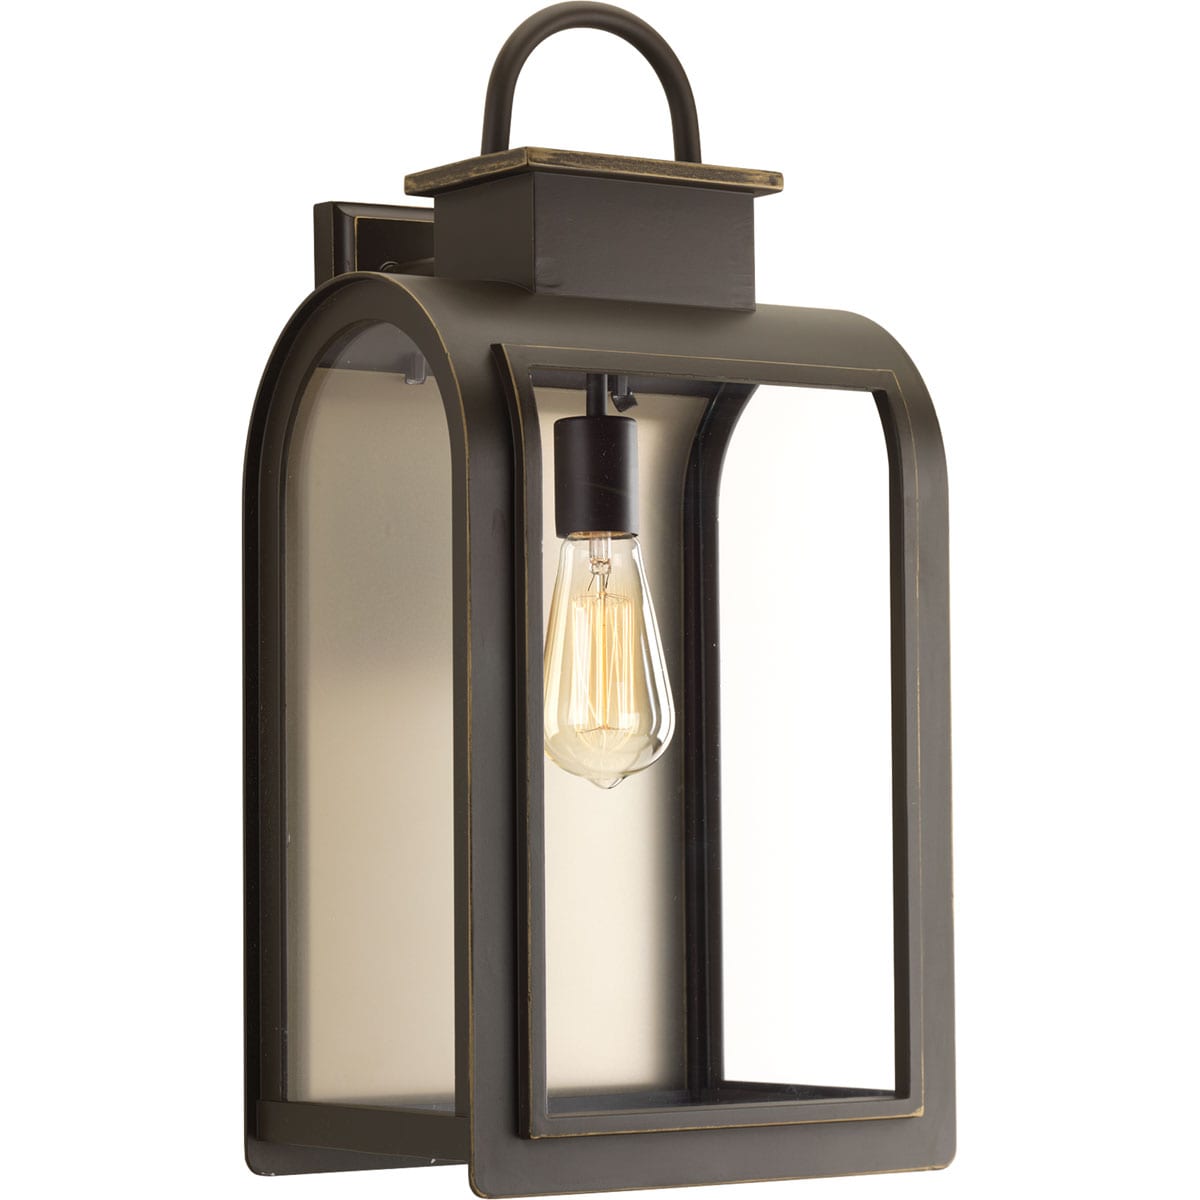 Oil-rubbed Outdoor Wall Lighting at Lowes.com